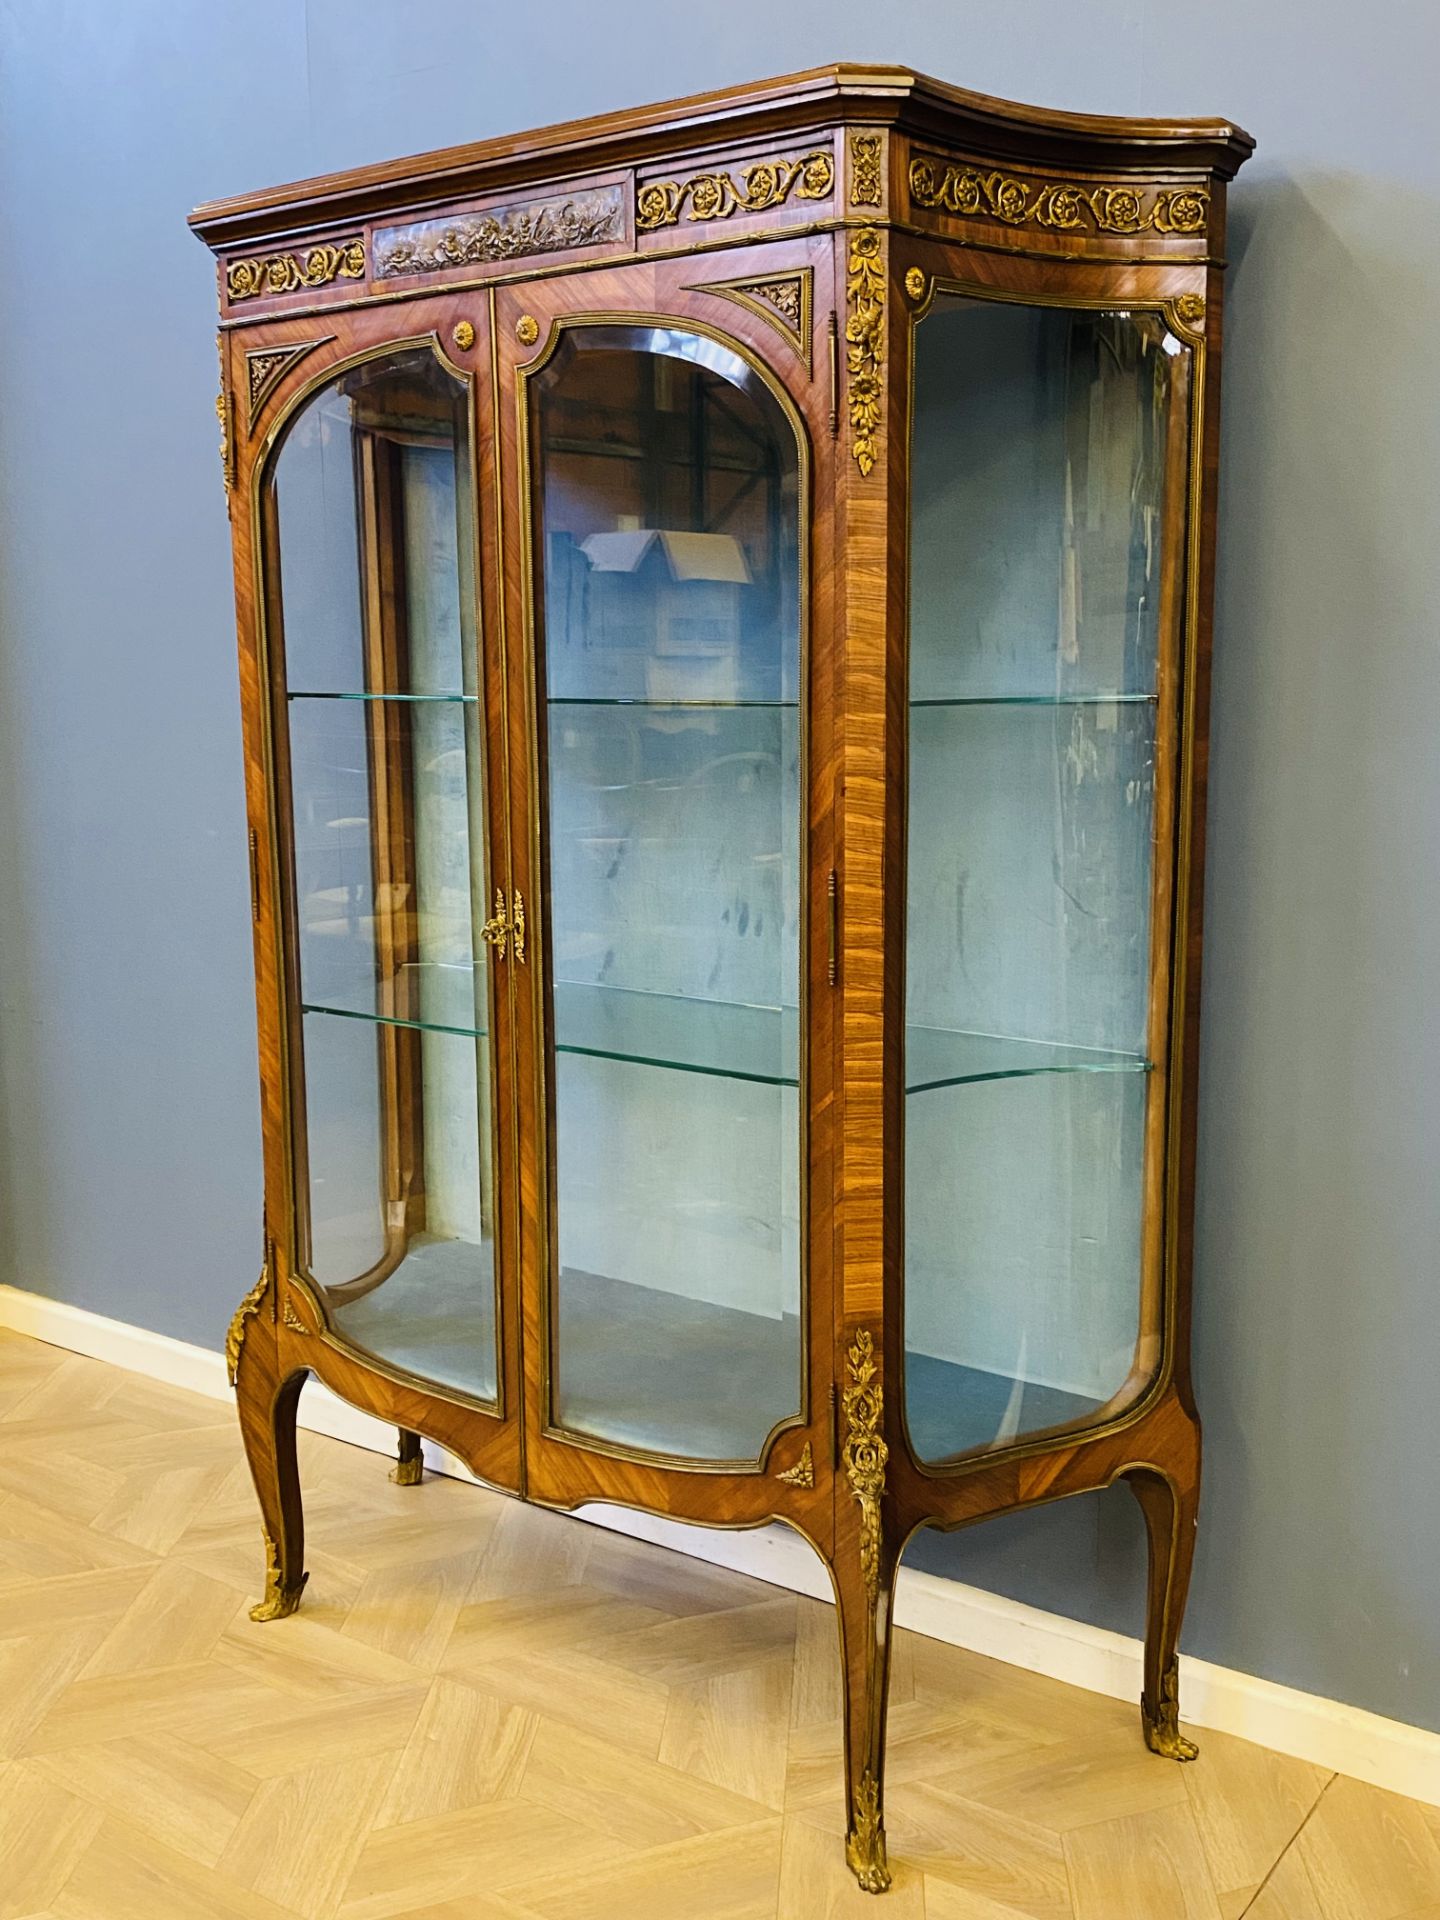 Late 19th century French kingwood and ormolu mounted two door vitrine - Image 2 of 7